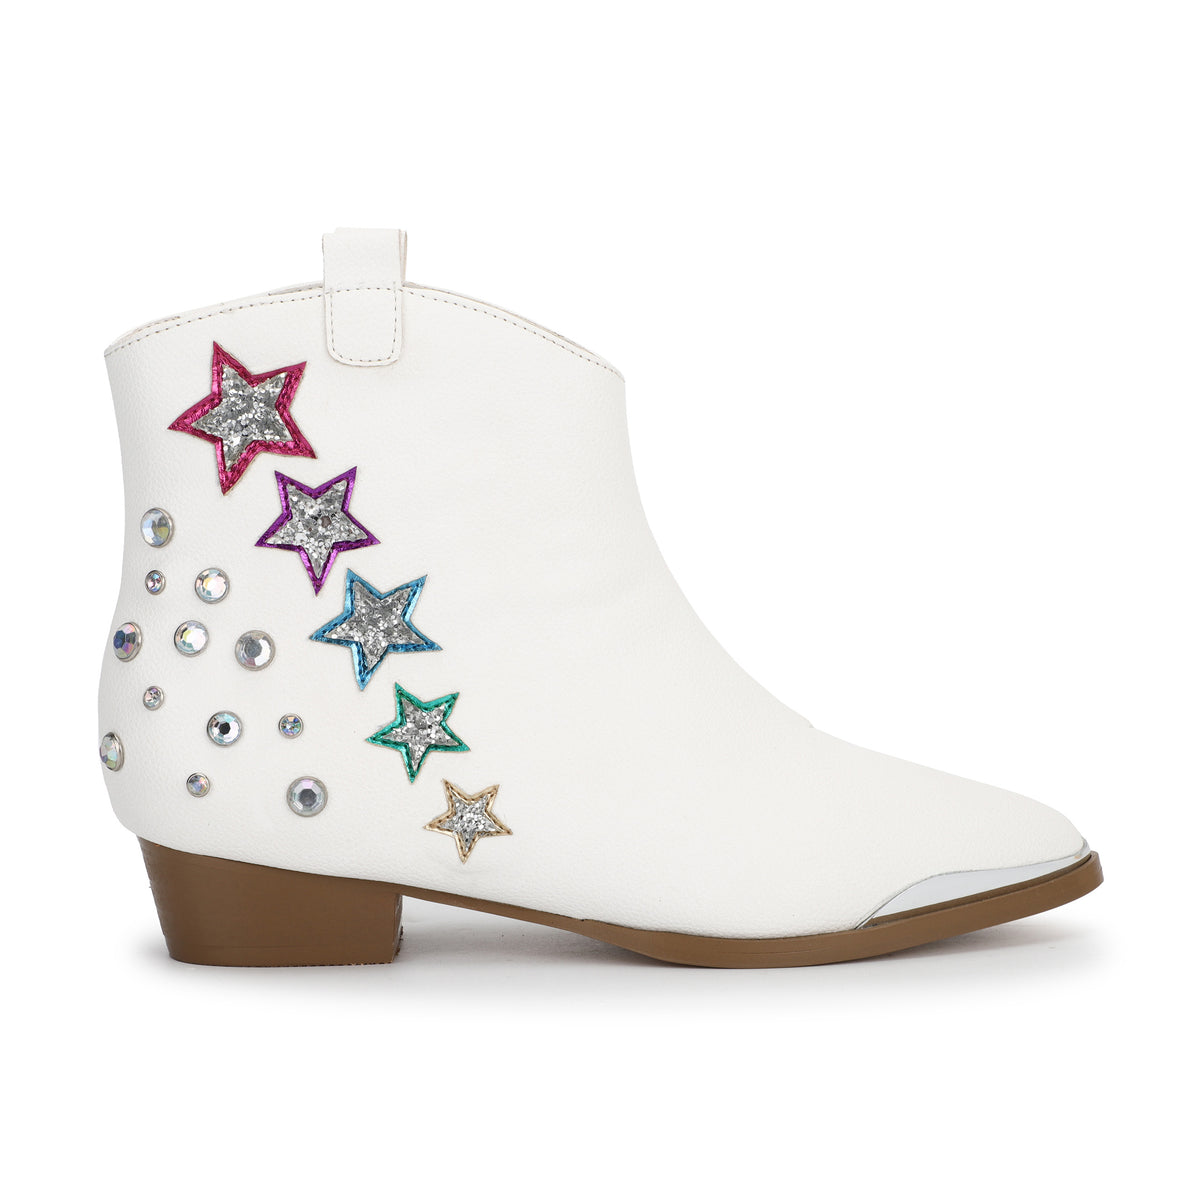 Miss Dallas Western Boot in White Shooting Stars - Kids